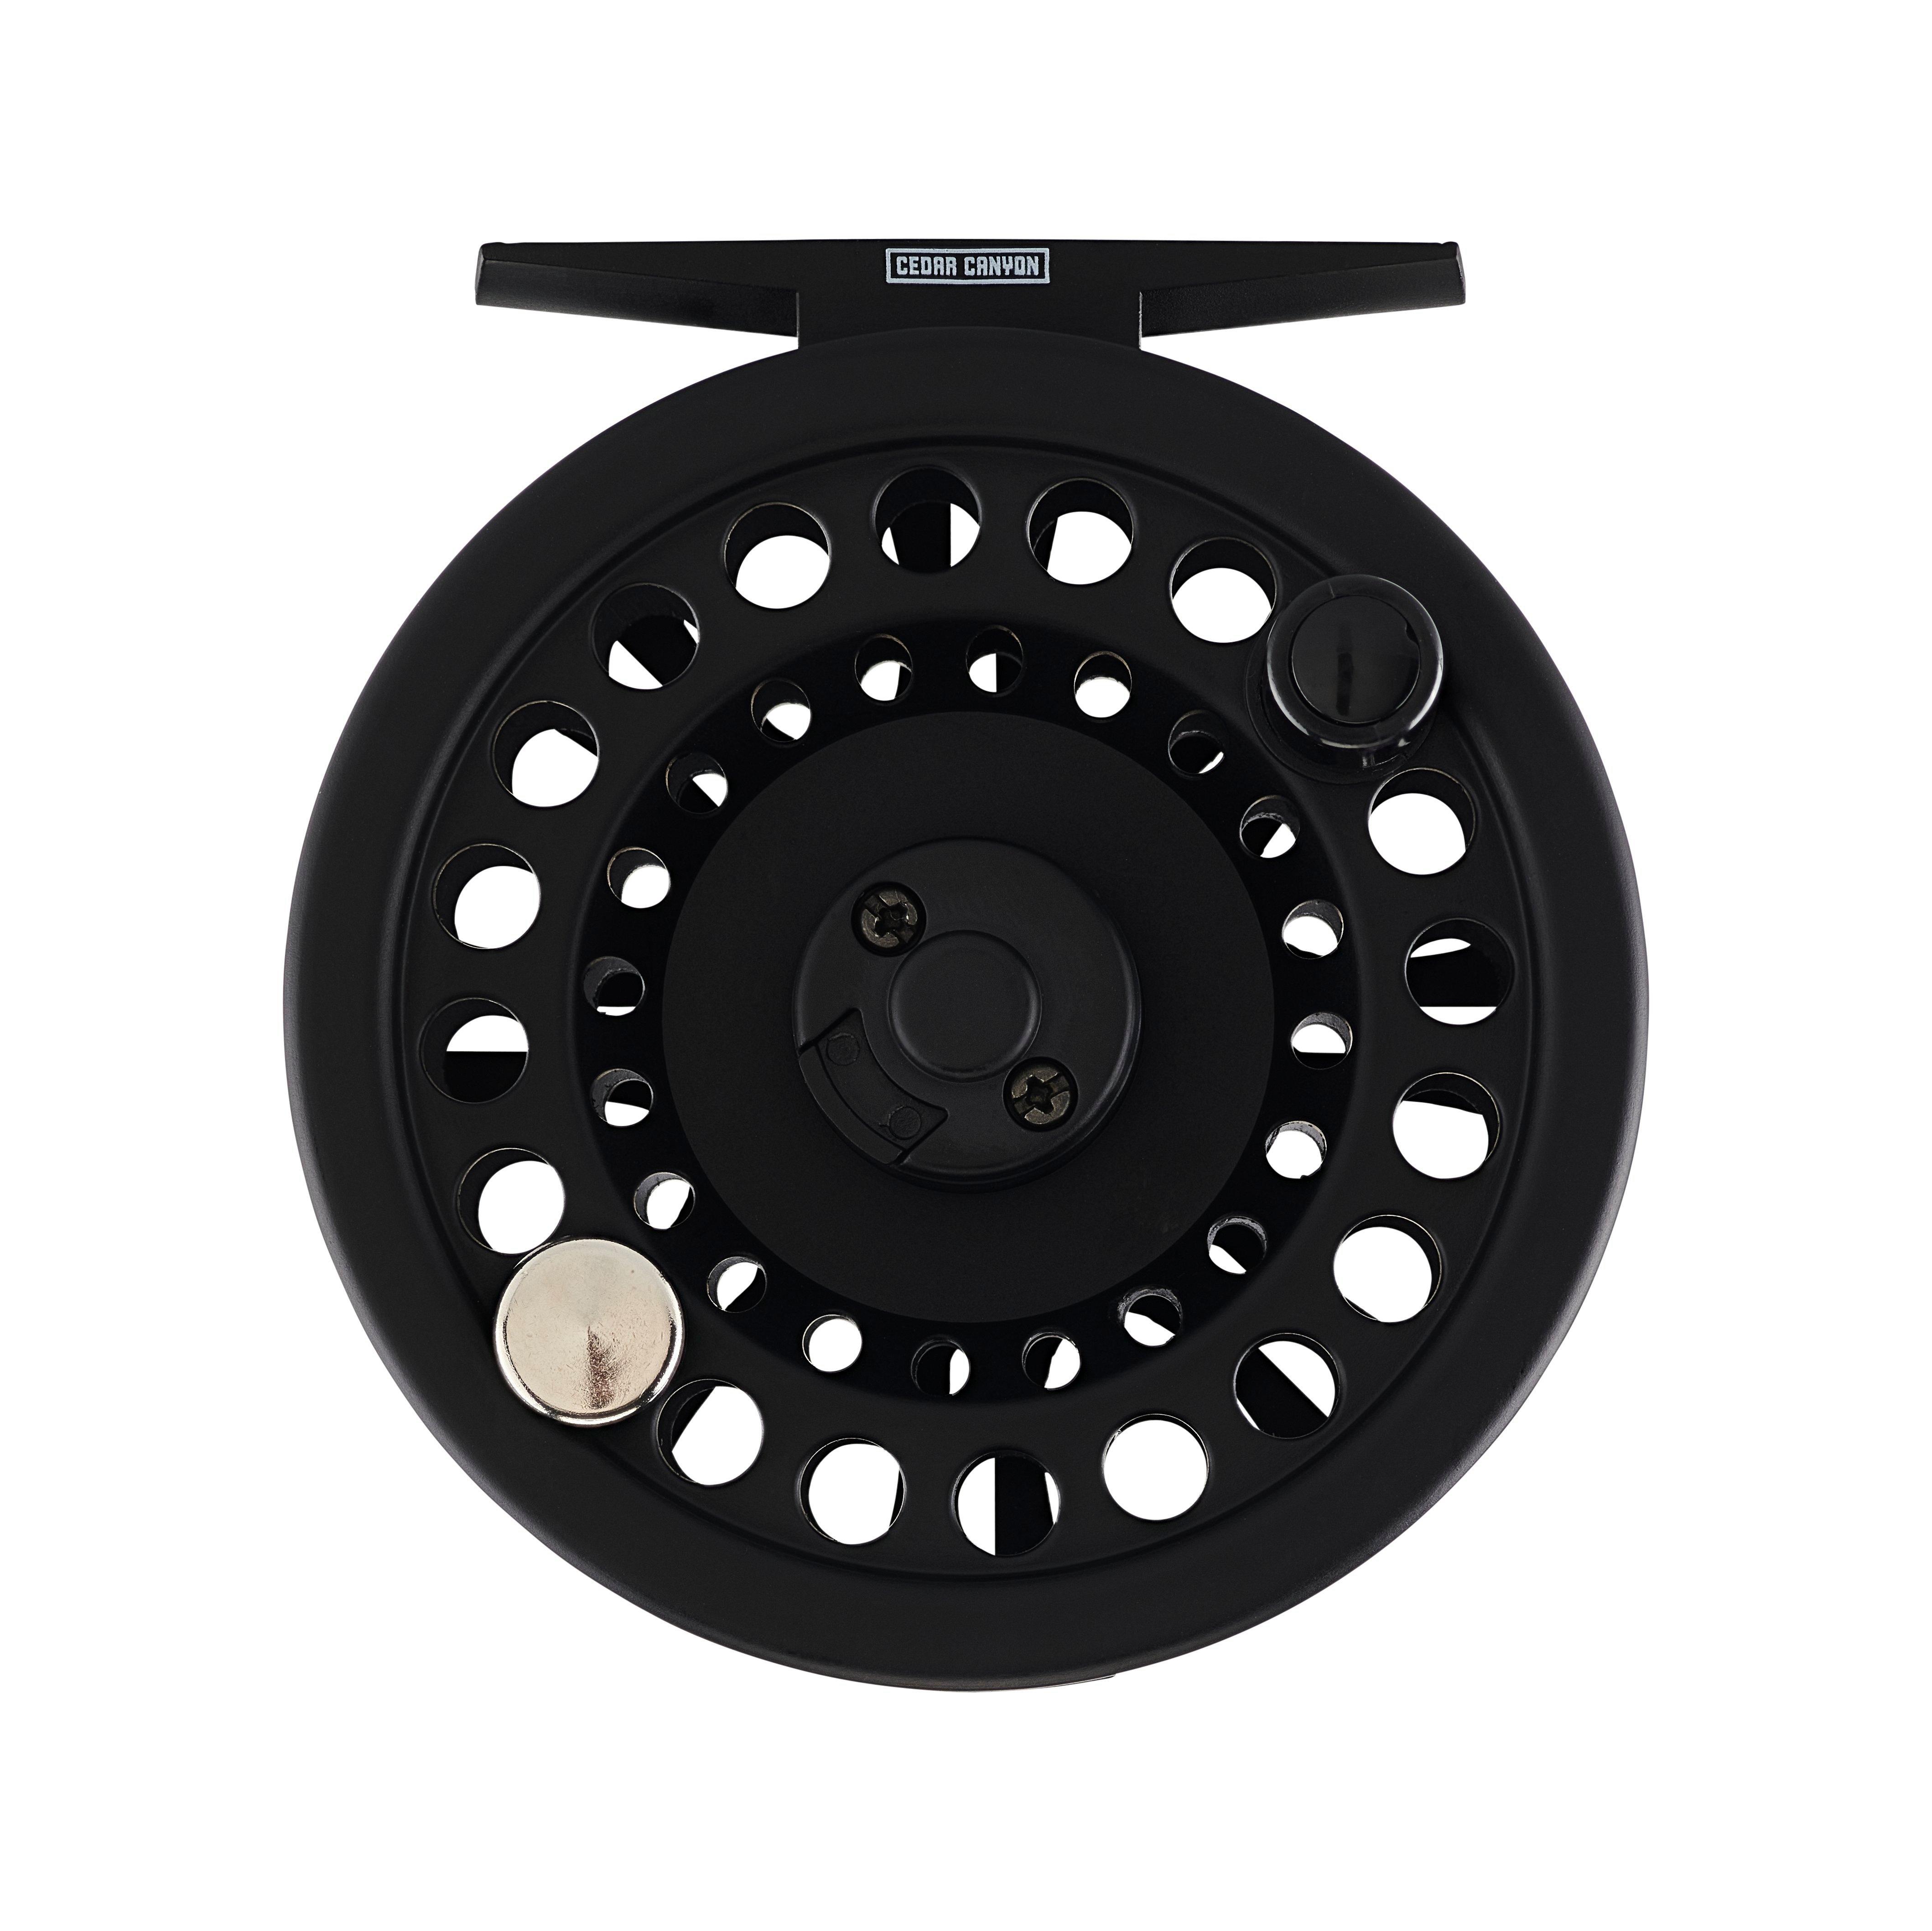 Line WF 9 Intermediate Shakespeare Fly Fishing Reel Large Arbour with Backing and Leader loop fitted 